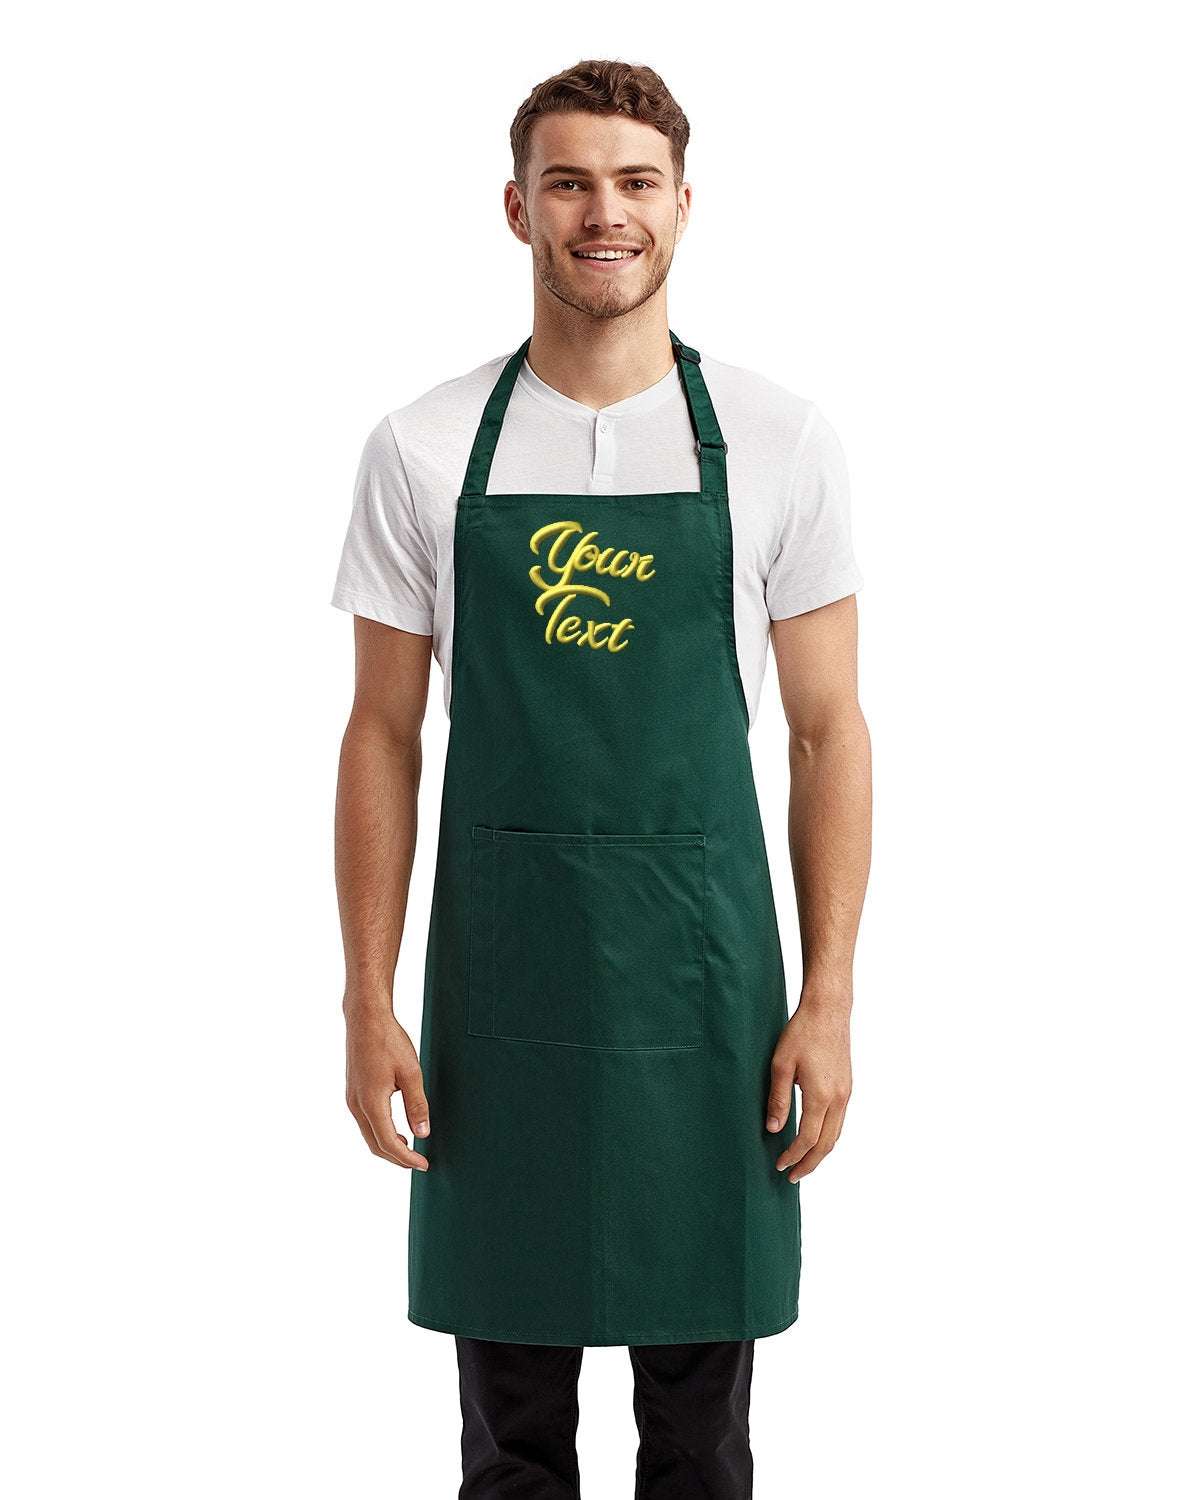 Restaurant Aprons with Your Company Name Embroidered - 3 Pack green